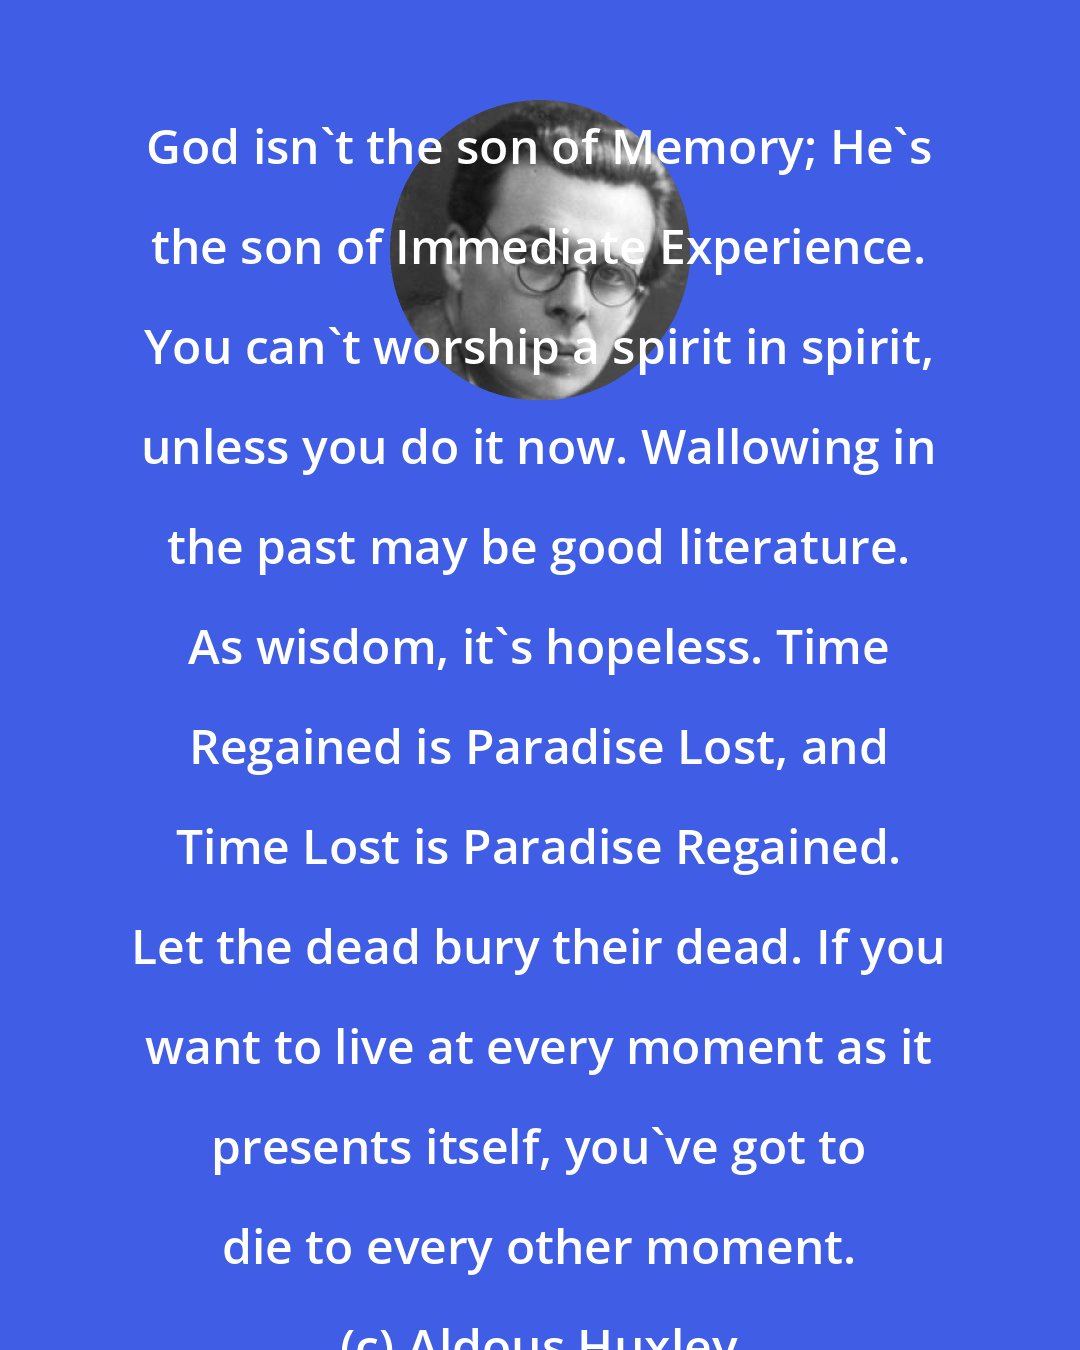 Aldous Huxley: God isn't the son of Memory; He's the son of Immediate Experience. You can't worship a spirit in spirit, unless you do it now. Wallowing in the past may be good literature. As wisdom, it's hopeless. Time Regained is Paradise Lost, and Time Lost is Paradise Regained. Let the dead bury their dead. If you want to live at every moment as it presents itself, you've got to die to every other moment.